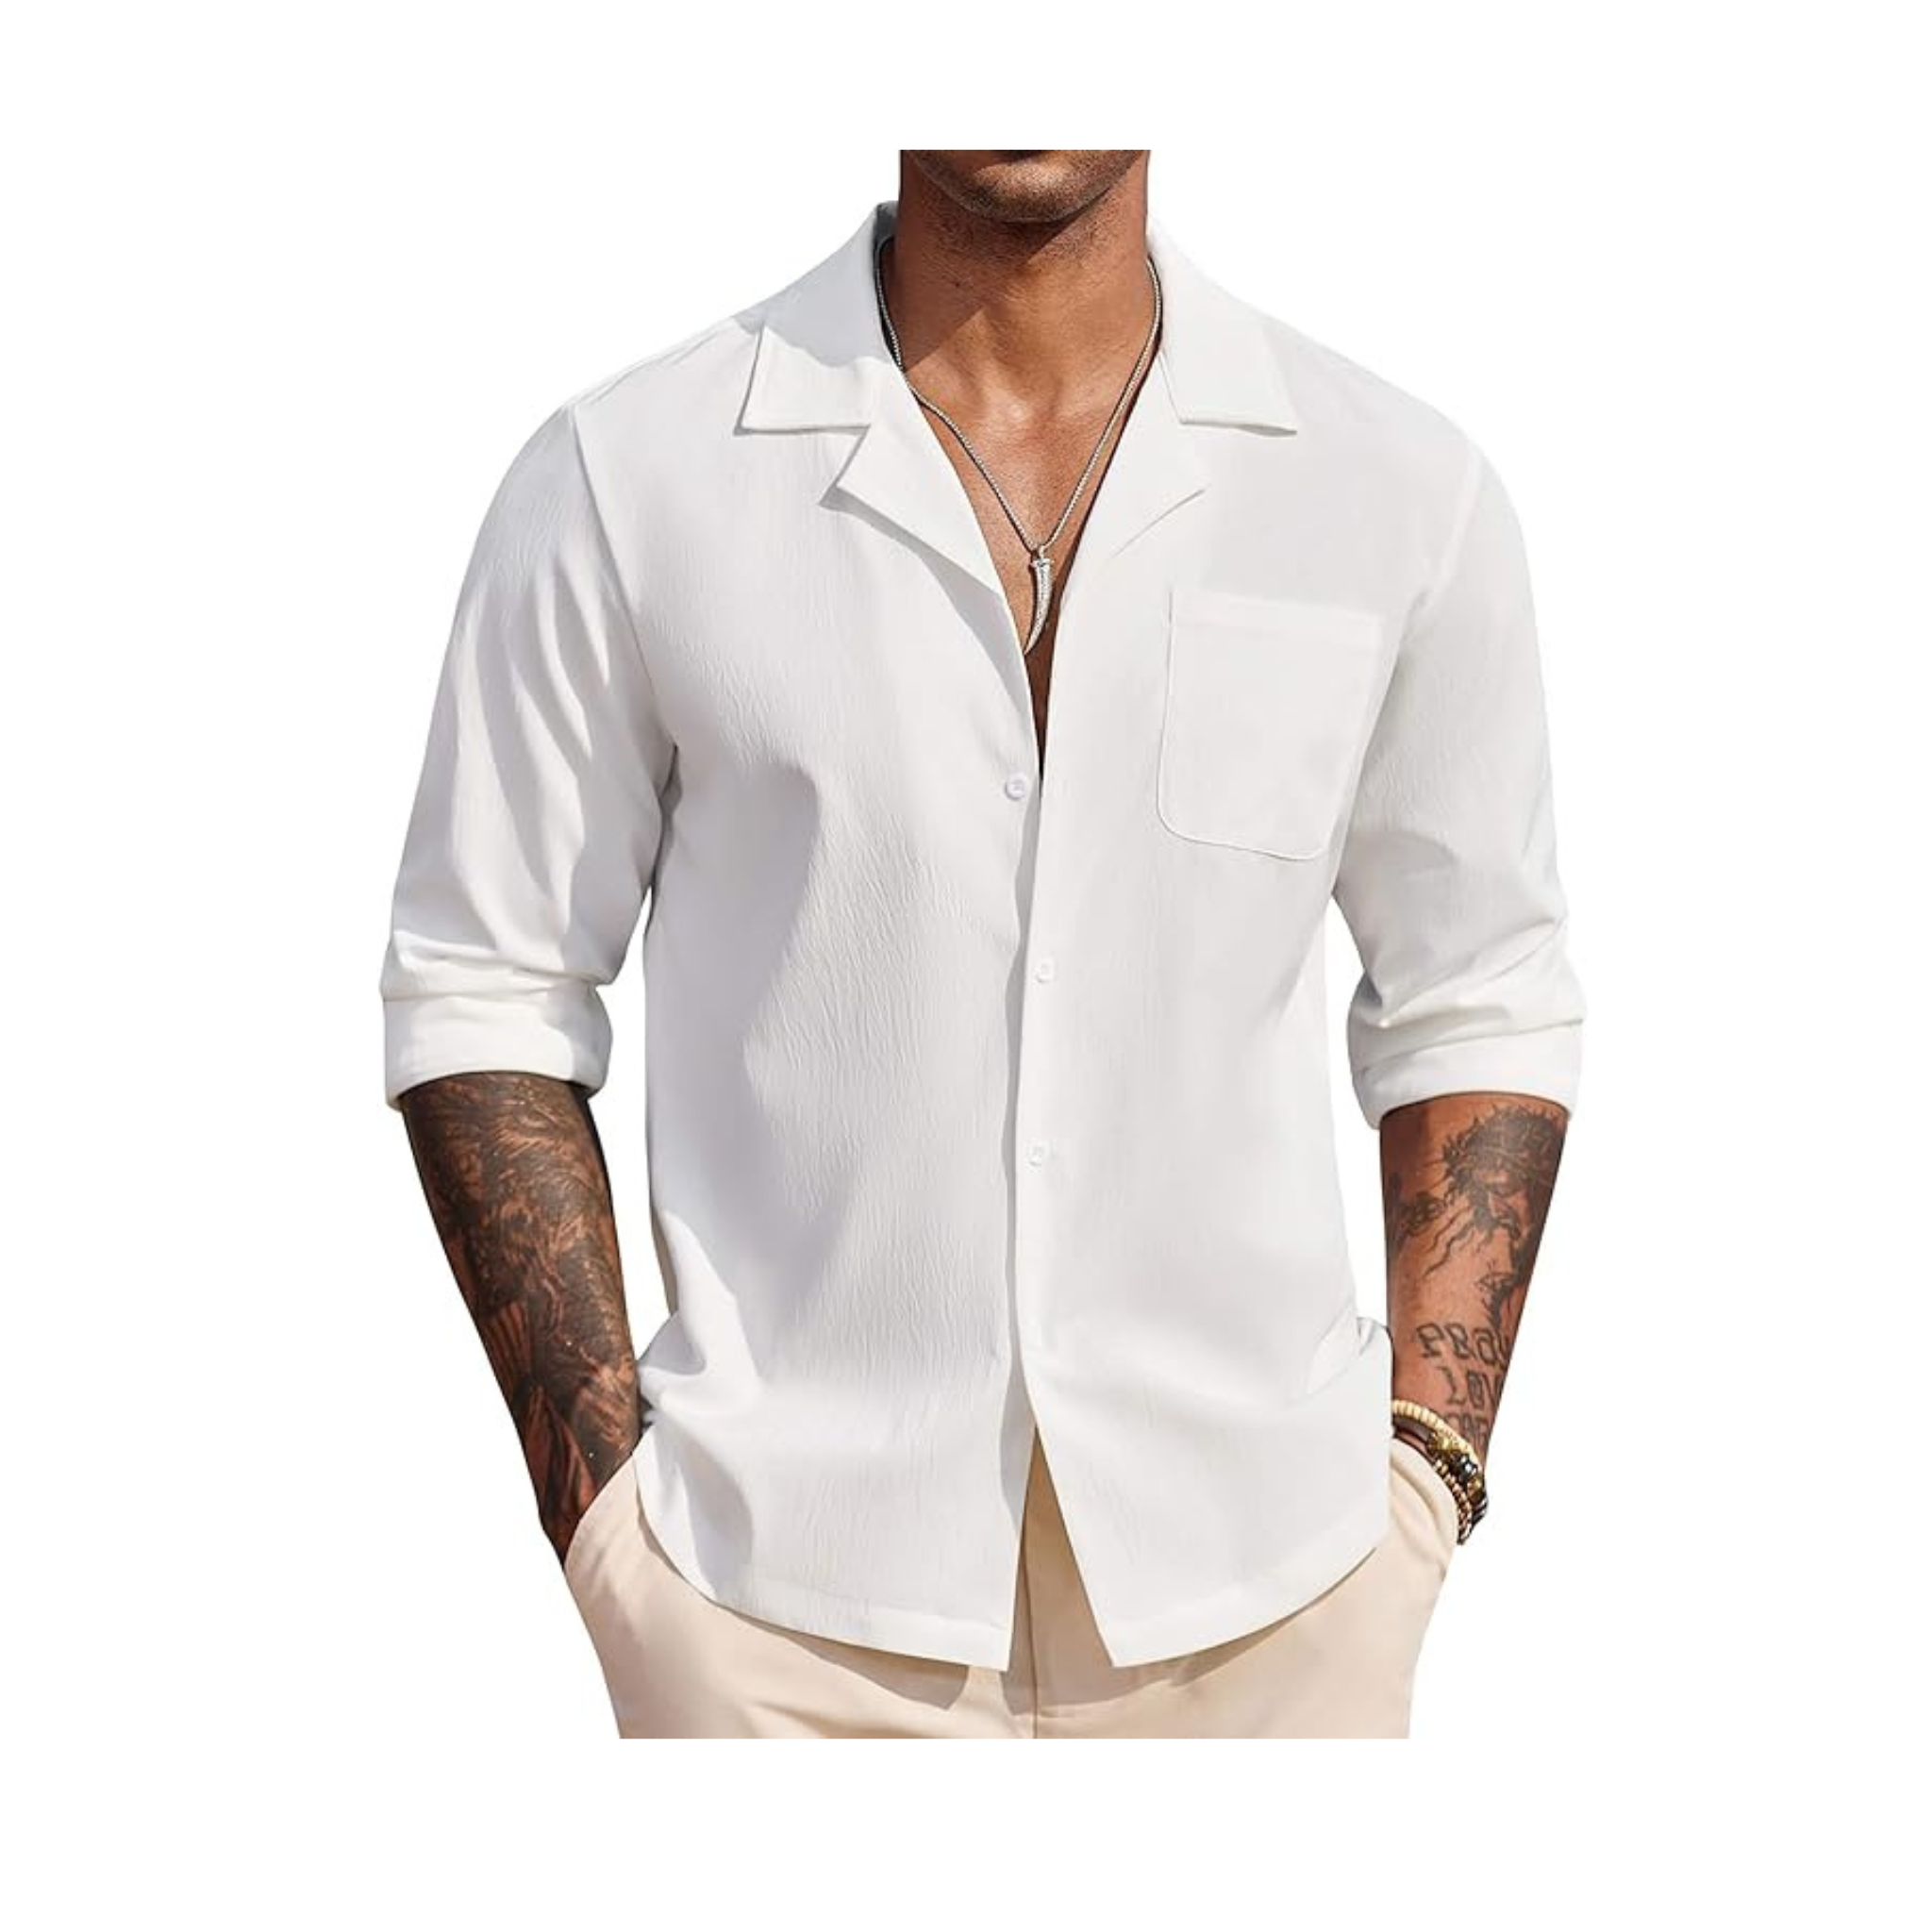 Men's Casual Wrinkle Free Summer Beach Shirts